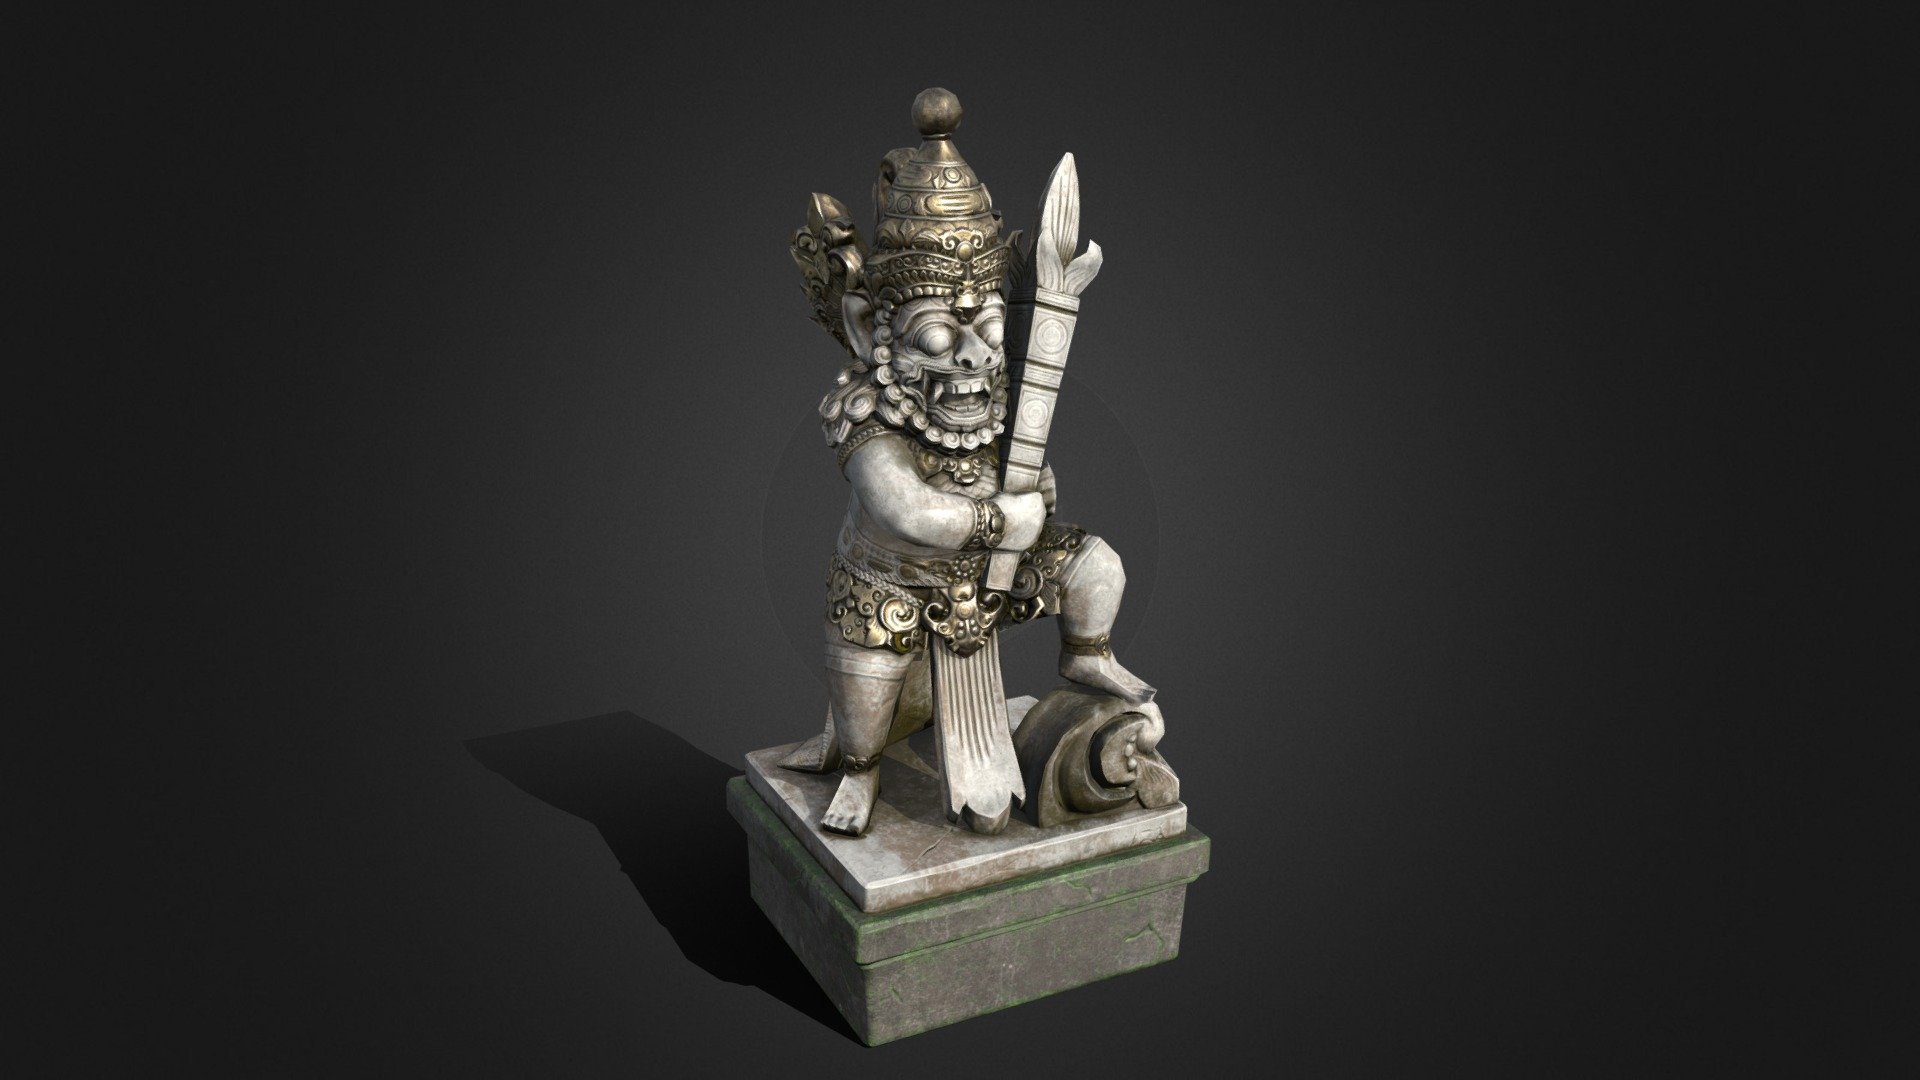 Since i was traveling on Bali few years ago, I dreamed to make a game ready model of one of Bali statues. I was very inspired, and finally i did it! - Bali Sculpture Barong - 3D model by julita.tattoo 3d model